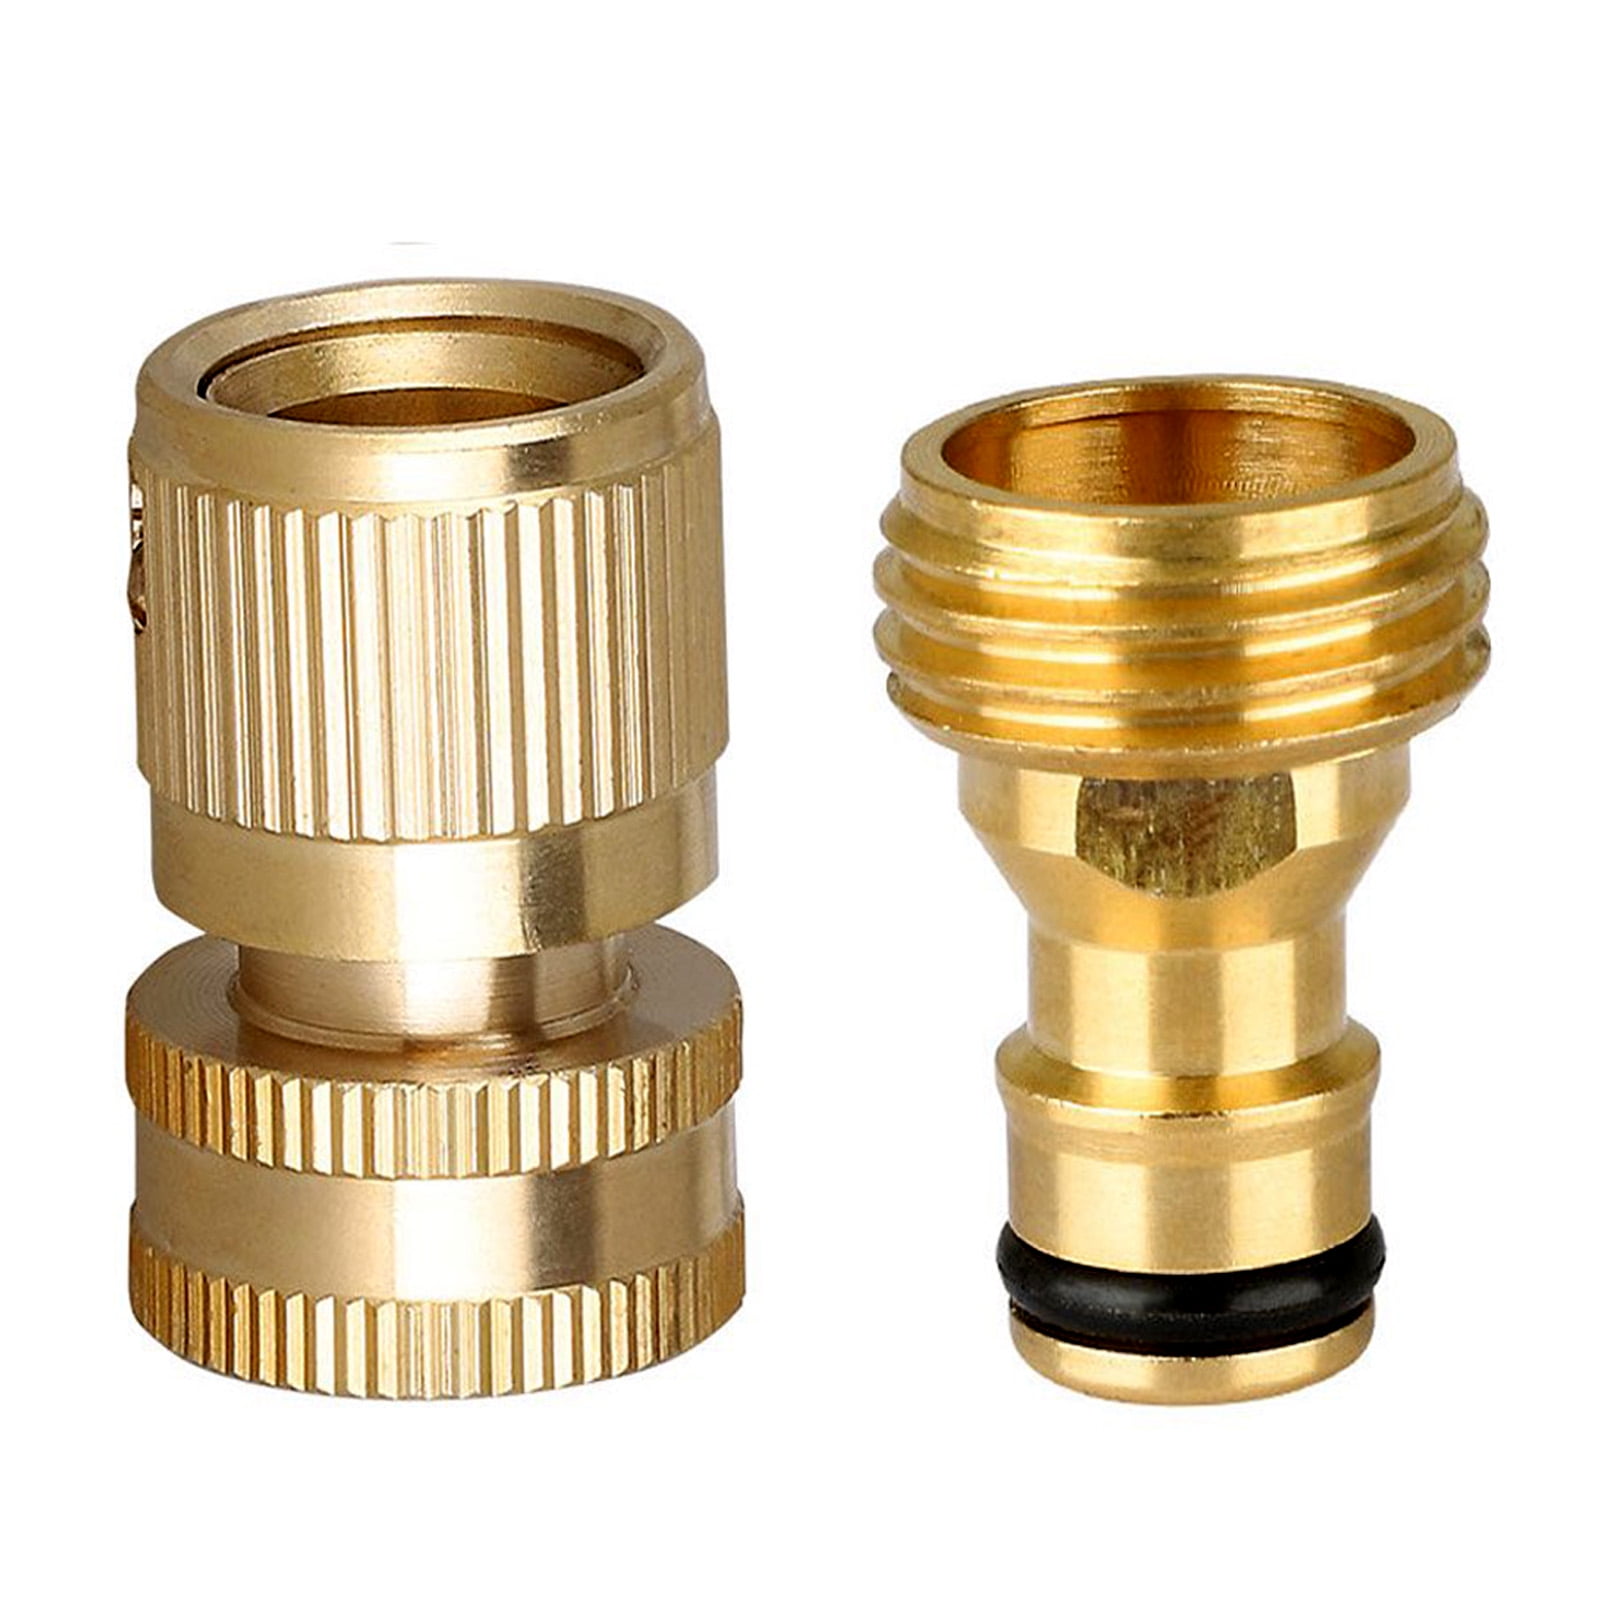 3/4" INCH THREADED TAP ADAPTER CONNECTOR GARDEN HOSE PIPE WATER QUICK CONNECTION 